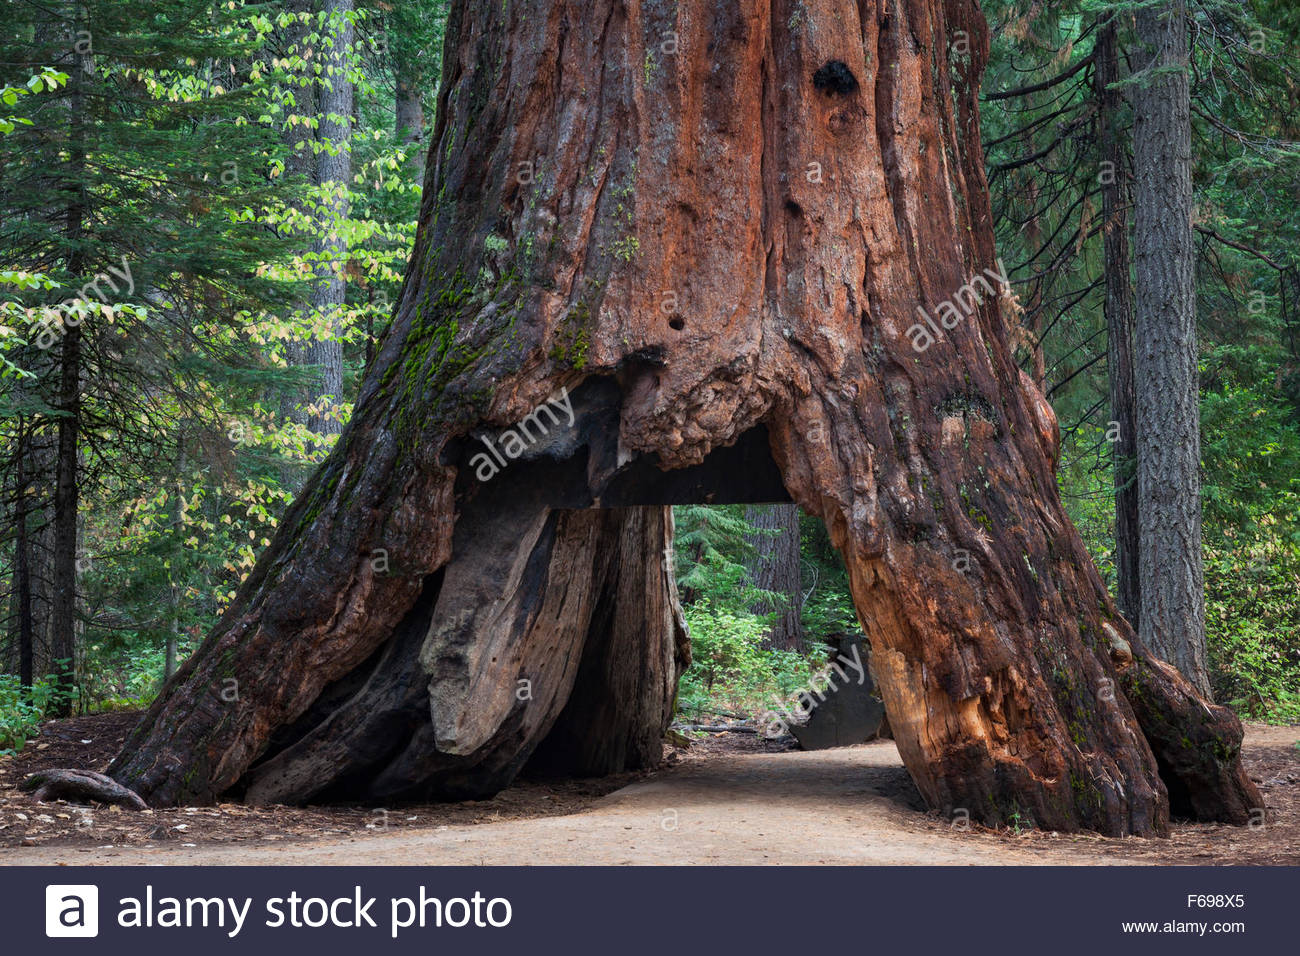 Hot Hot Hot - Page 7 The-pioneer-cabin-tree-giant-sequoia-calaveras-big-trees-state-park-F698X5